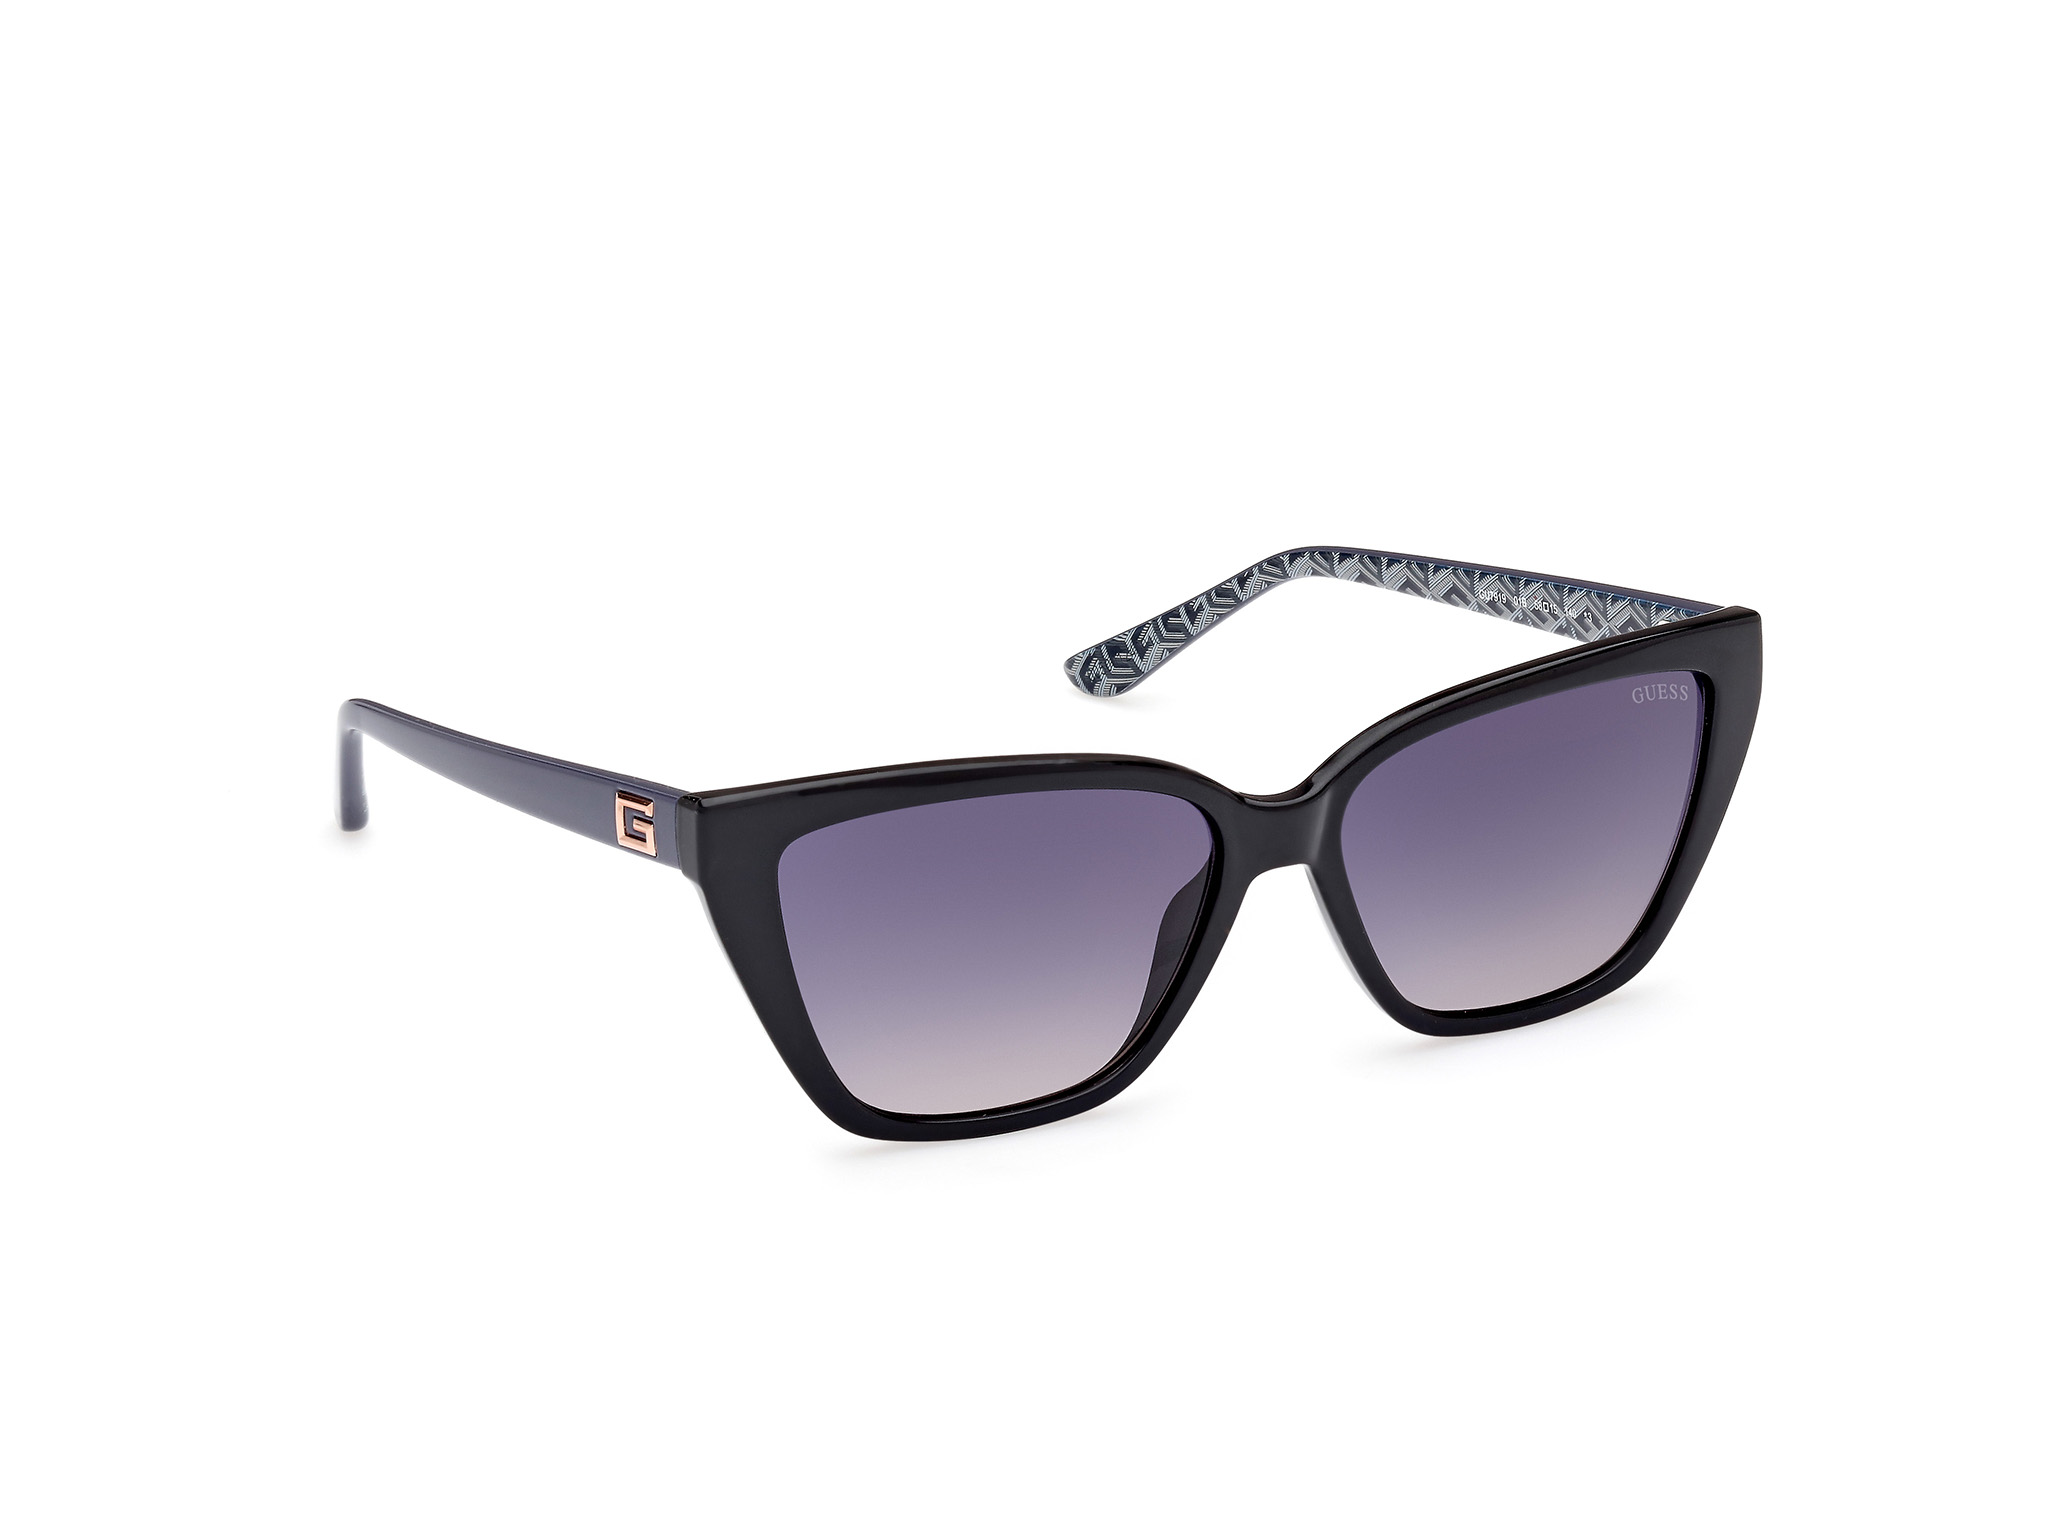 Guess Eyewear Collection - Marcolin